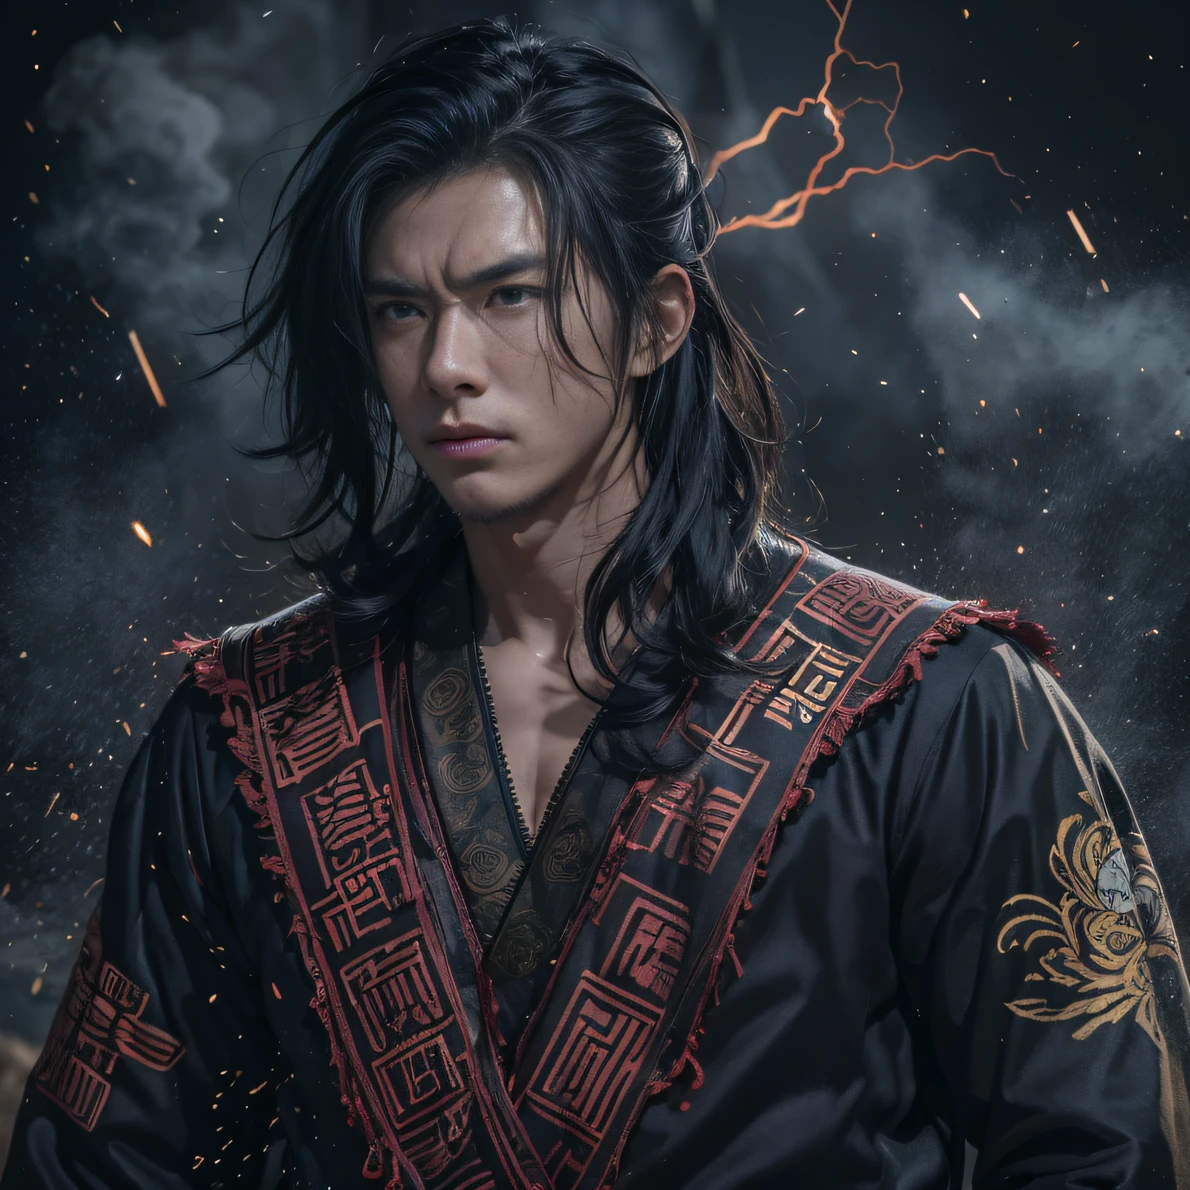 Face away from the camera（ruins）eyes filled with angry，He clenched his fists，Rush up，Deliver a fatal blow to your opponent，full bodyesbian，Full Body Male Mage 32K（tmasterpiece，k hd，hyper HD，32K）Long flowing black hair，Campsite size，zydink， a color， patriot （ruins）， （Linen batik scarf）， Angry fighting stance， looking at the ground， Batik linen bandana， Chinese camellia pattern long sleeve garment， （Abstract propylene splash：1.2）， Dark clouds lightning background，Flour flies（realisticlying：1.4），Black color hair，Flour fluttering，Background fog， A high resolution， the detail， RAW photogr，Telephoto miniaturization， Sharp Re， Nikon D850 Film Stock Photo by Jefferies Lee 4 Kodak Portra 400 Camera F1.6 shots, Rich colors, ultra-realistic vivid textures, Dramatic lighting, Unreal Engine Art Station Trend, cinestir 800，Flowing black hair,（（（Male mage））），The male mage was furious，